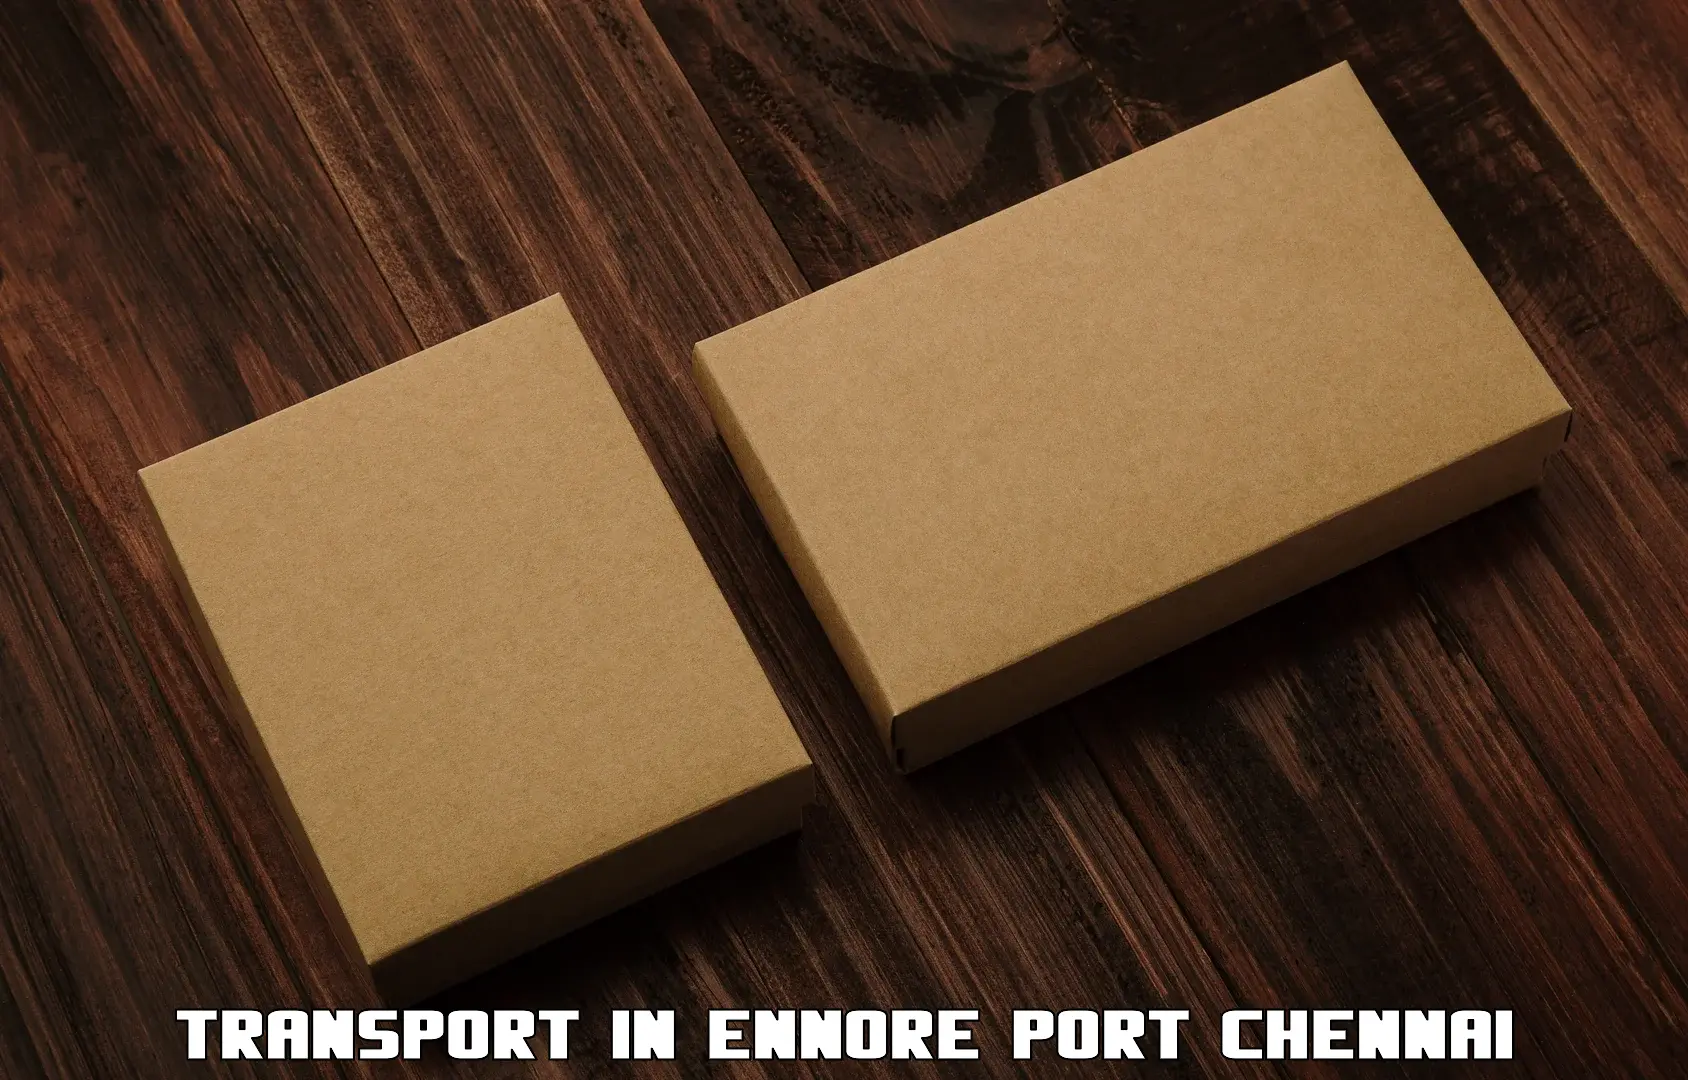 Cargo transport services in Ennore Port Chennai